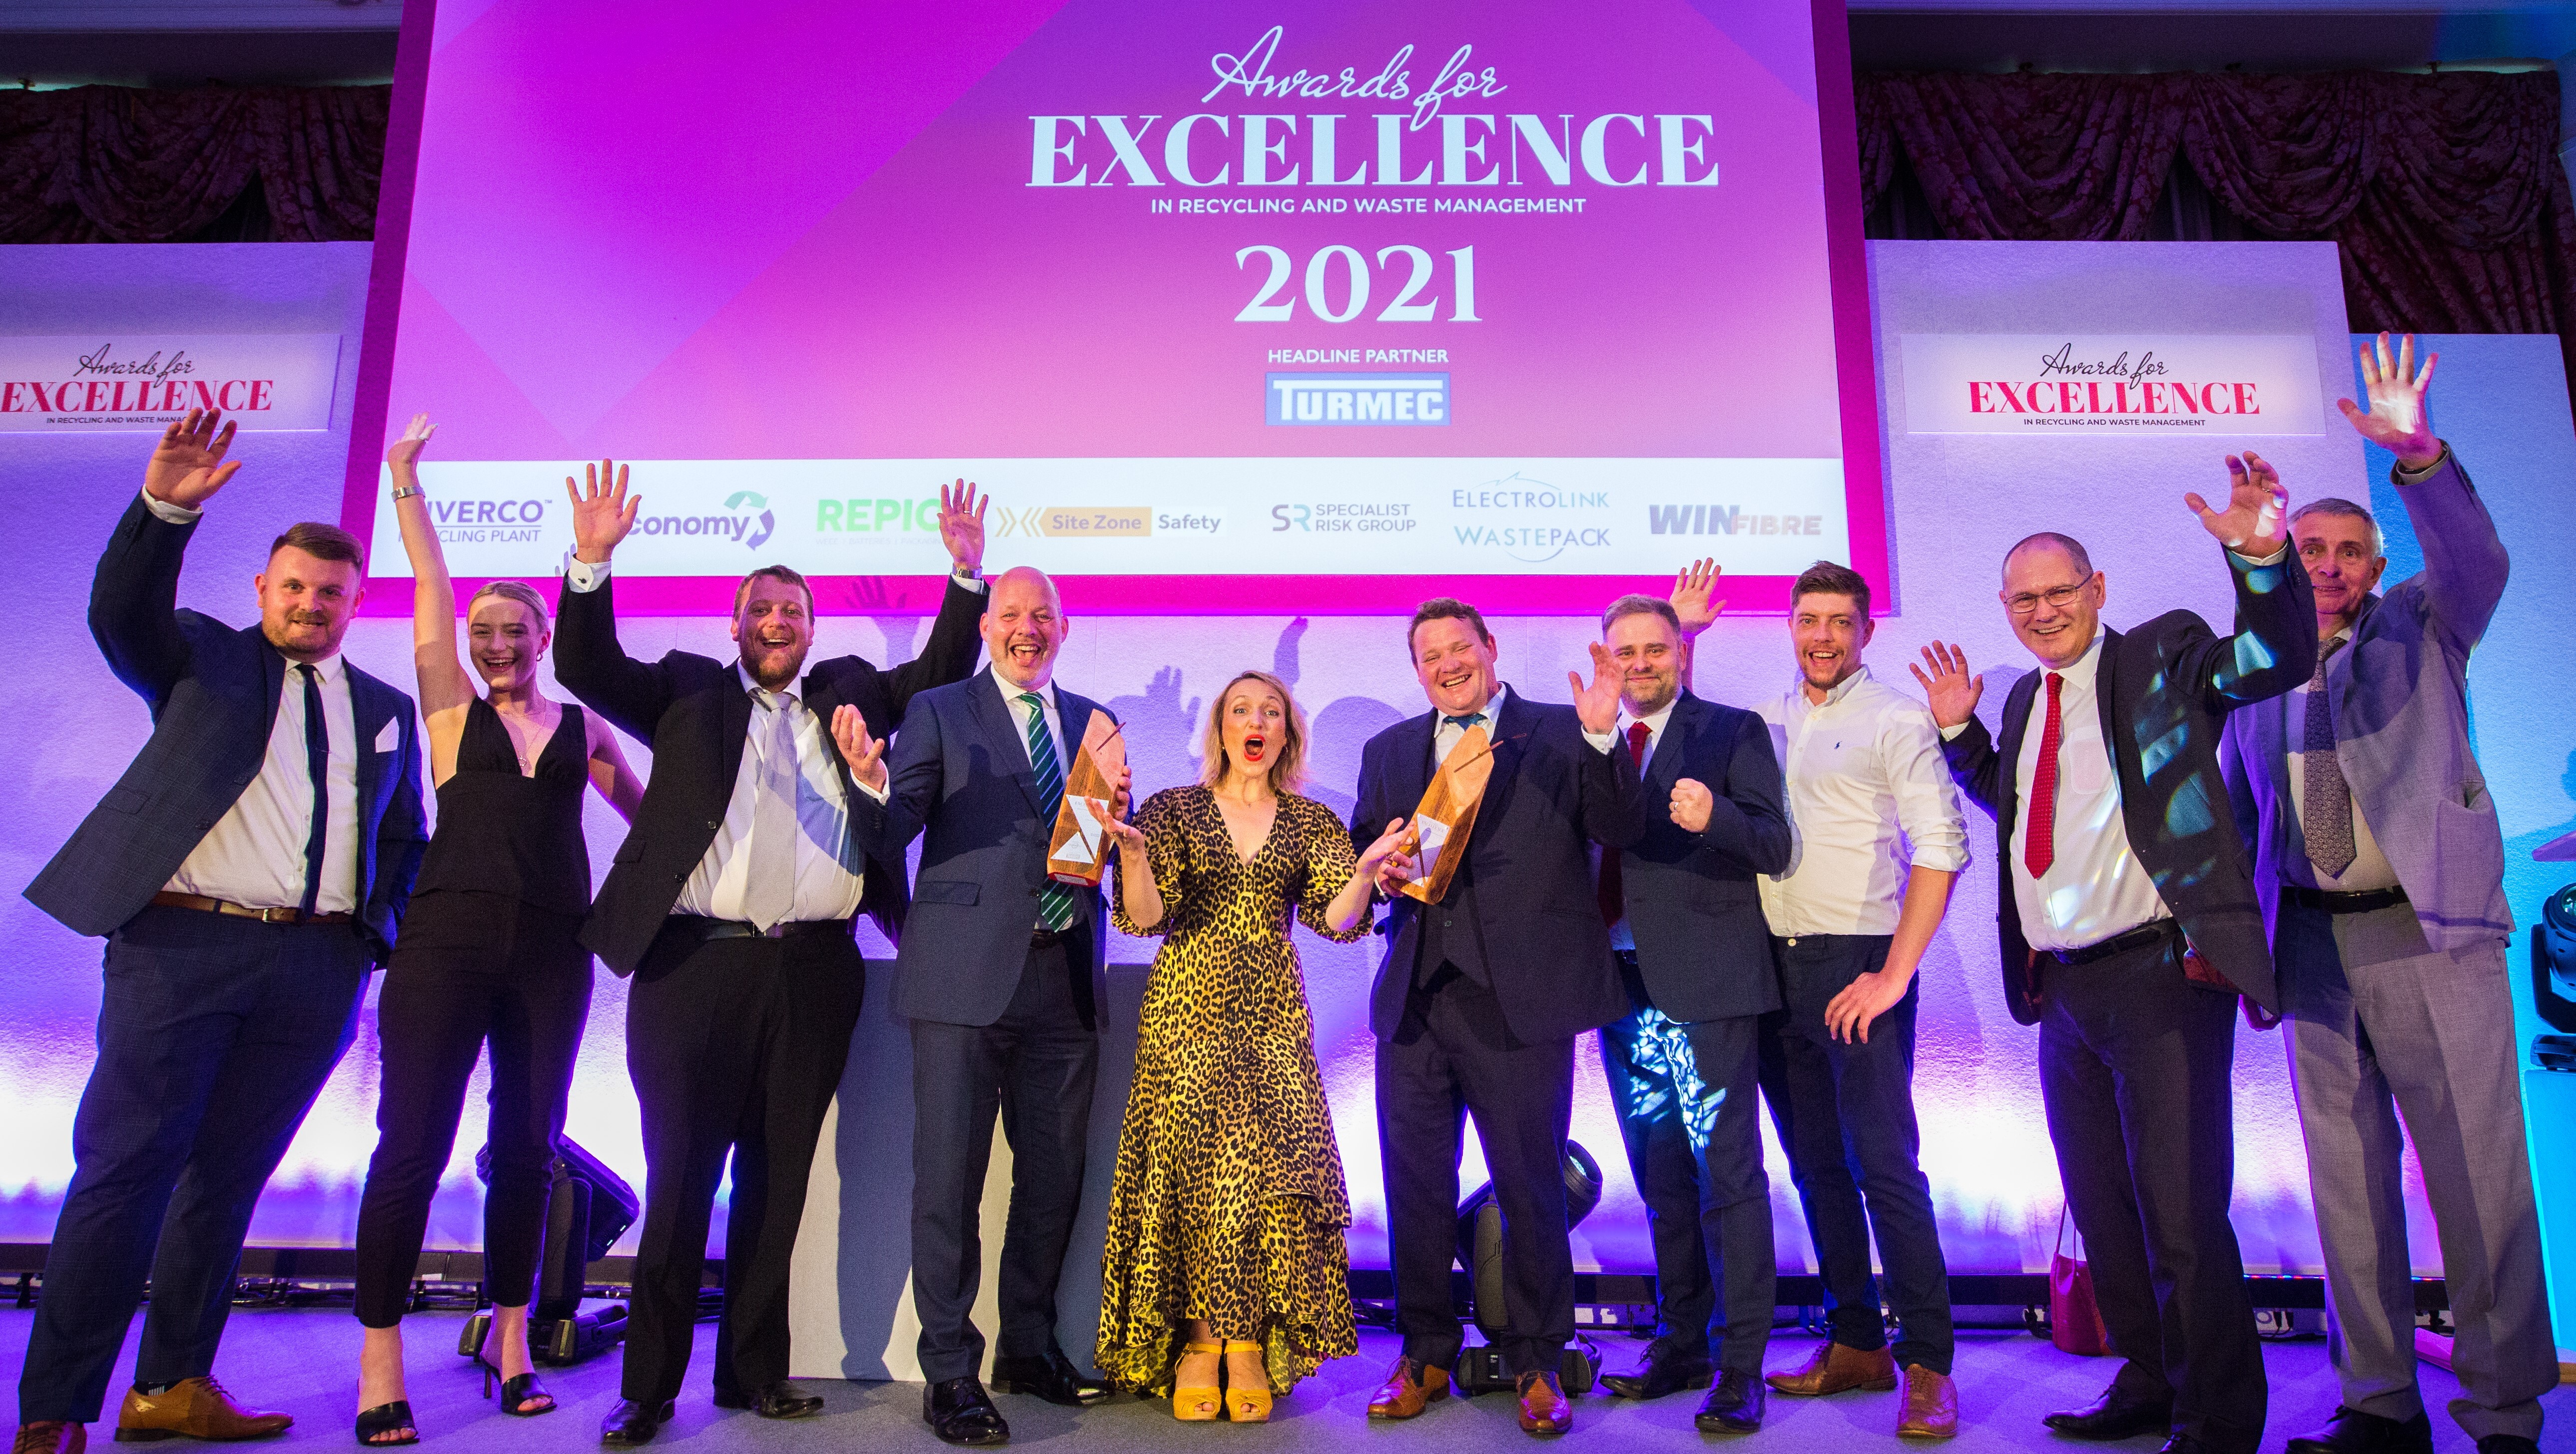 A double whammy win at 2021 Awards for Excellence!